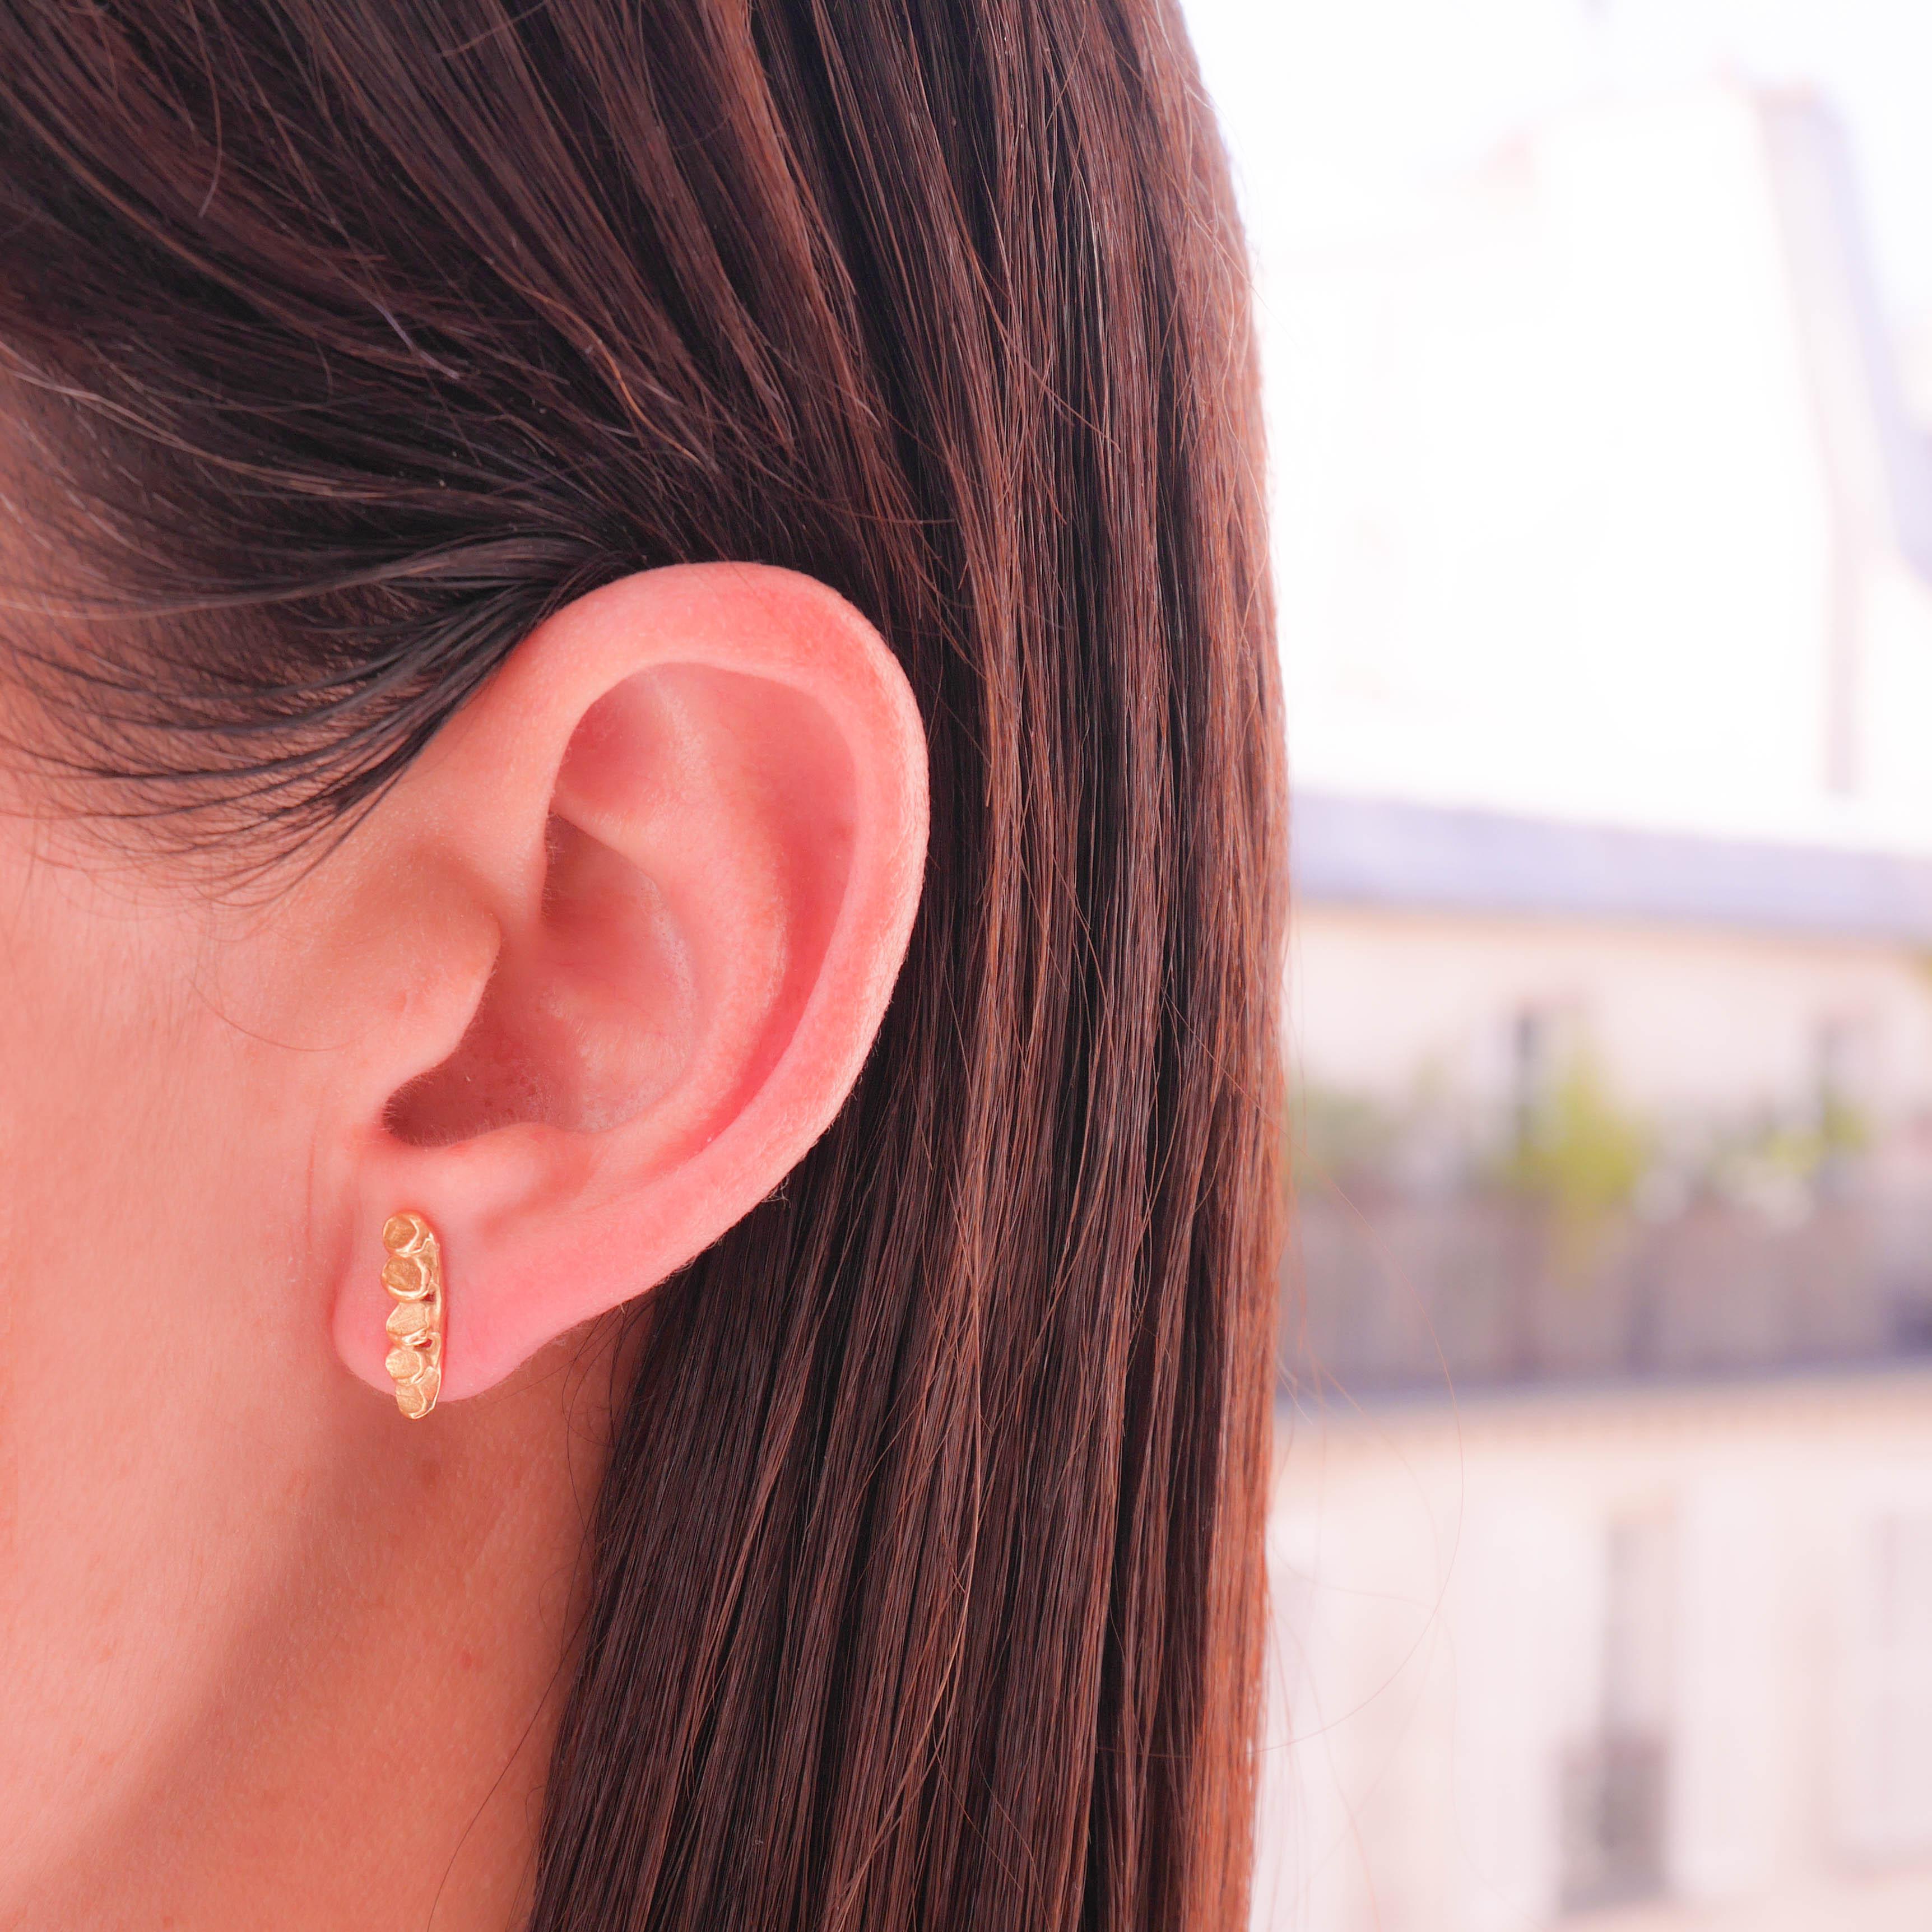 One of a kind earrings handcrafted from 18 Karat yellow gold weighs app. 3grm. Each leaf has been carefully hand-engraved by using time-honored techniques. 
Bell-back Alpa fastening for pierced ears.
The craftsmanship is entirely hand made with